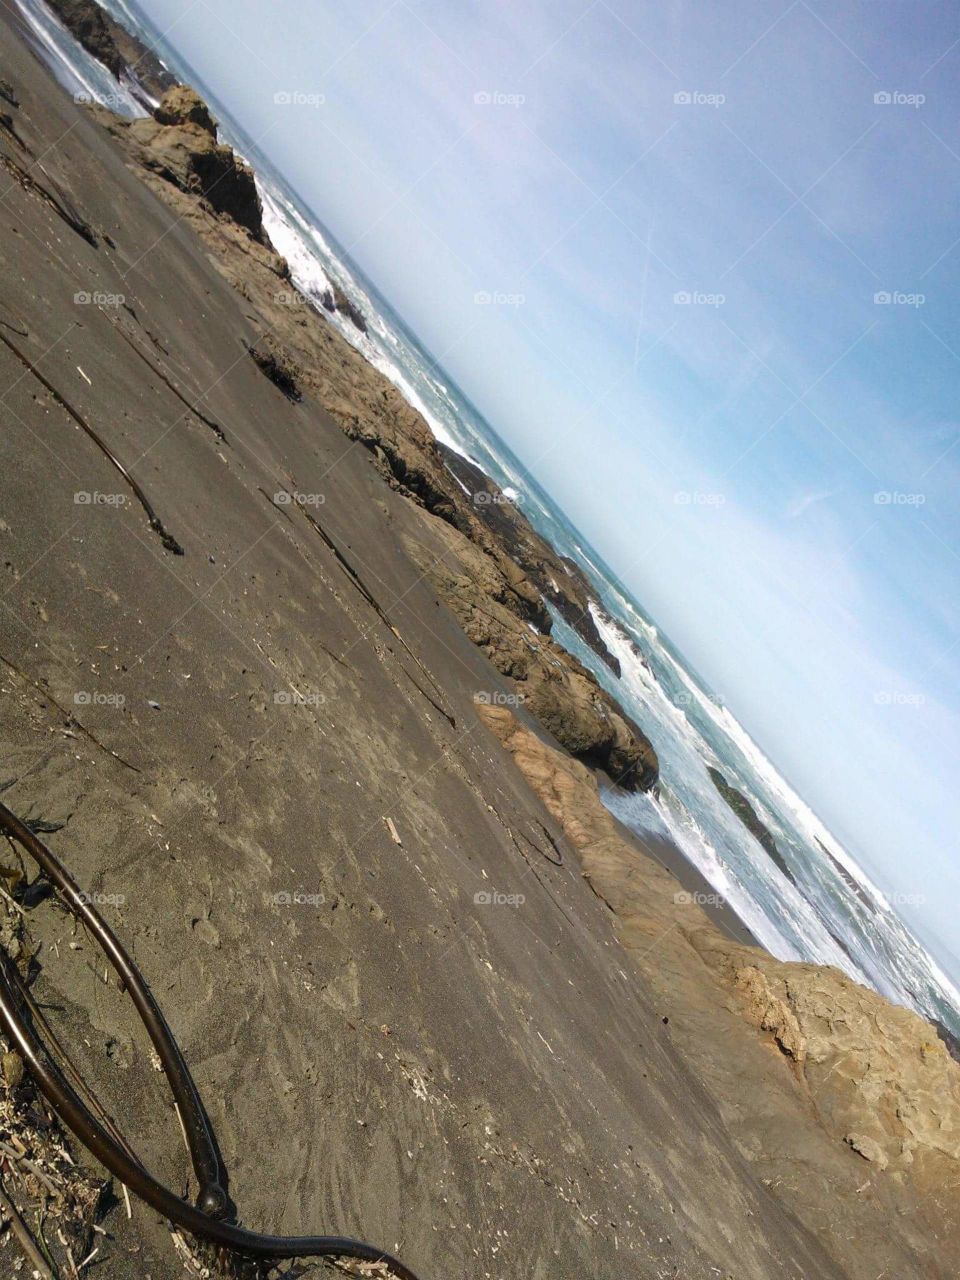 View of the expansive ocean while checking out the rocks just off the beach (Fort Bragg, CA)